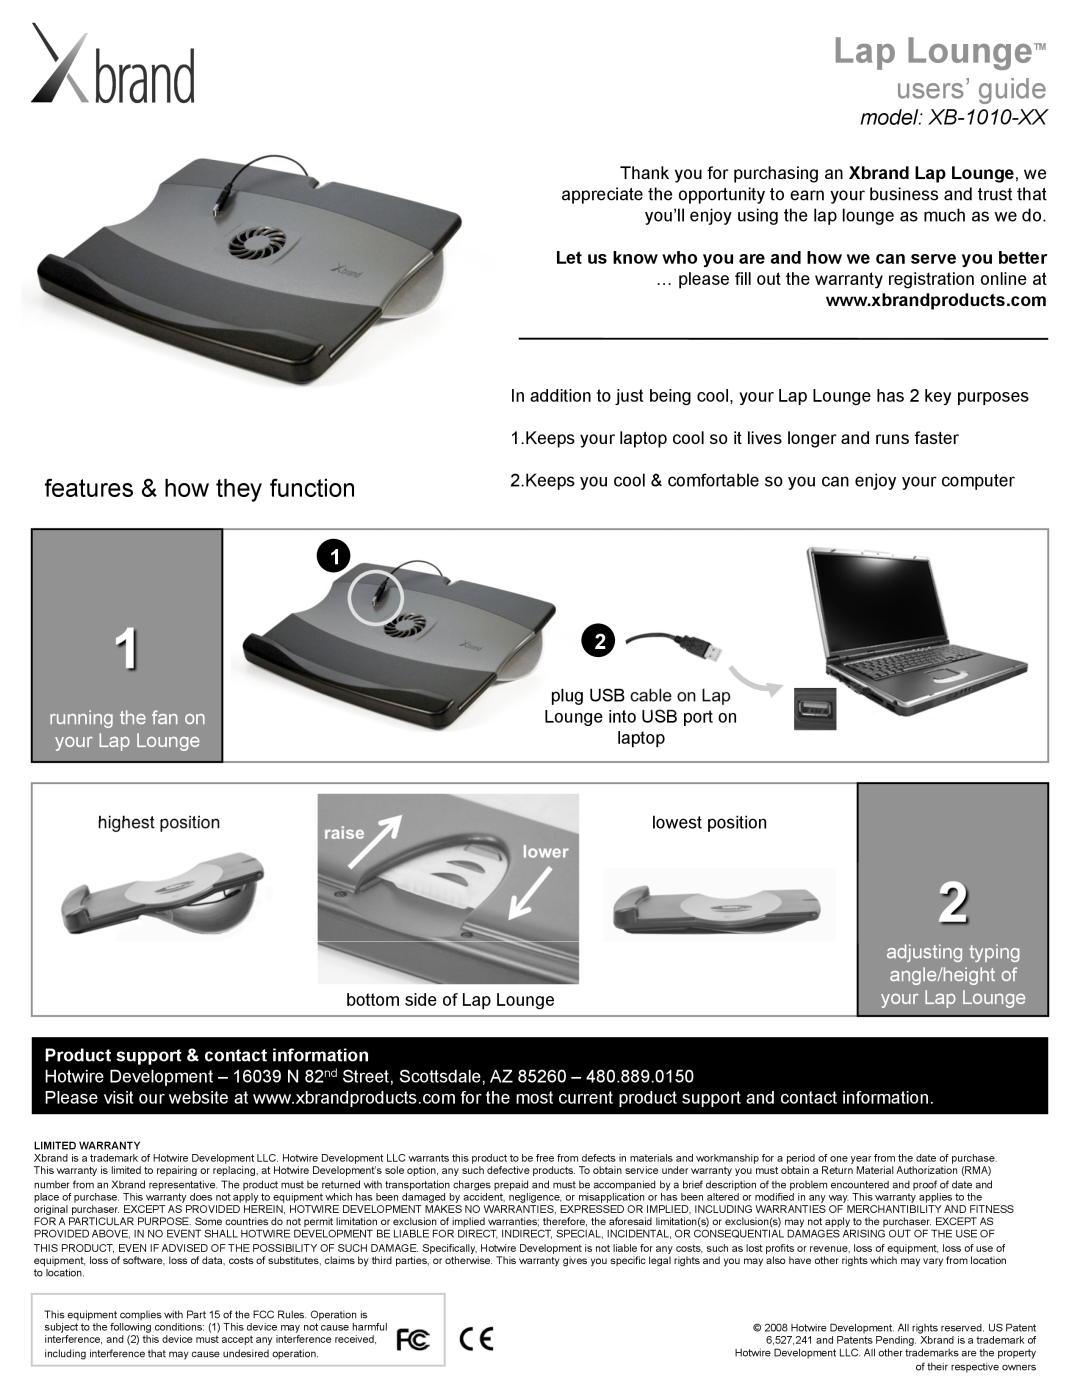 Xbrand warranty Lap LoungeTM, users’ guide, features & how they function, model XB-1010-XX, highest position, raise 